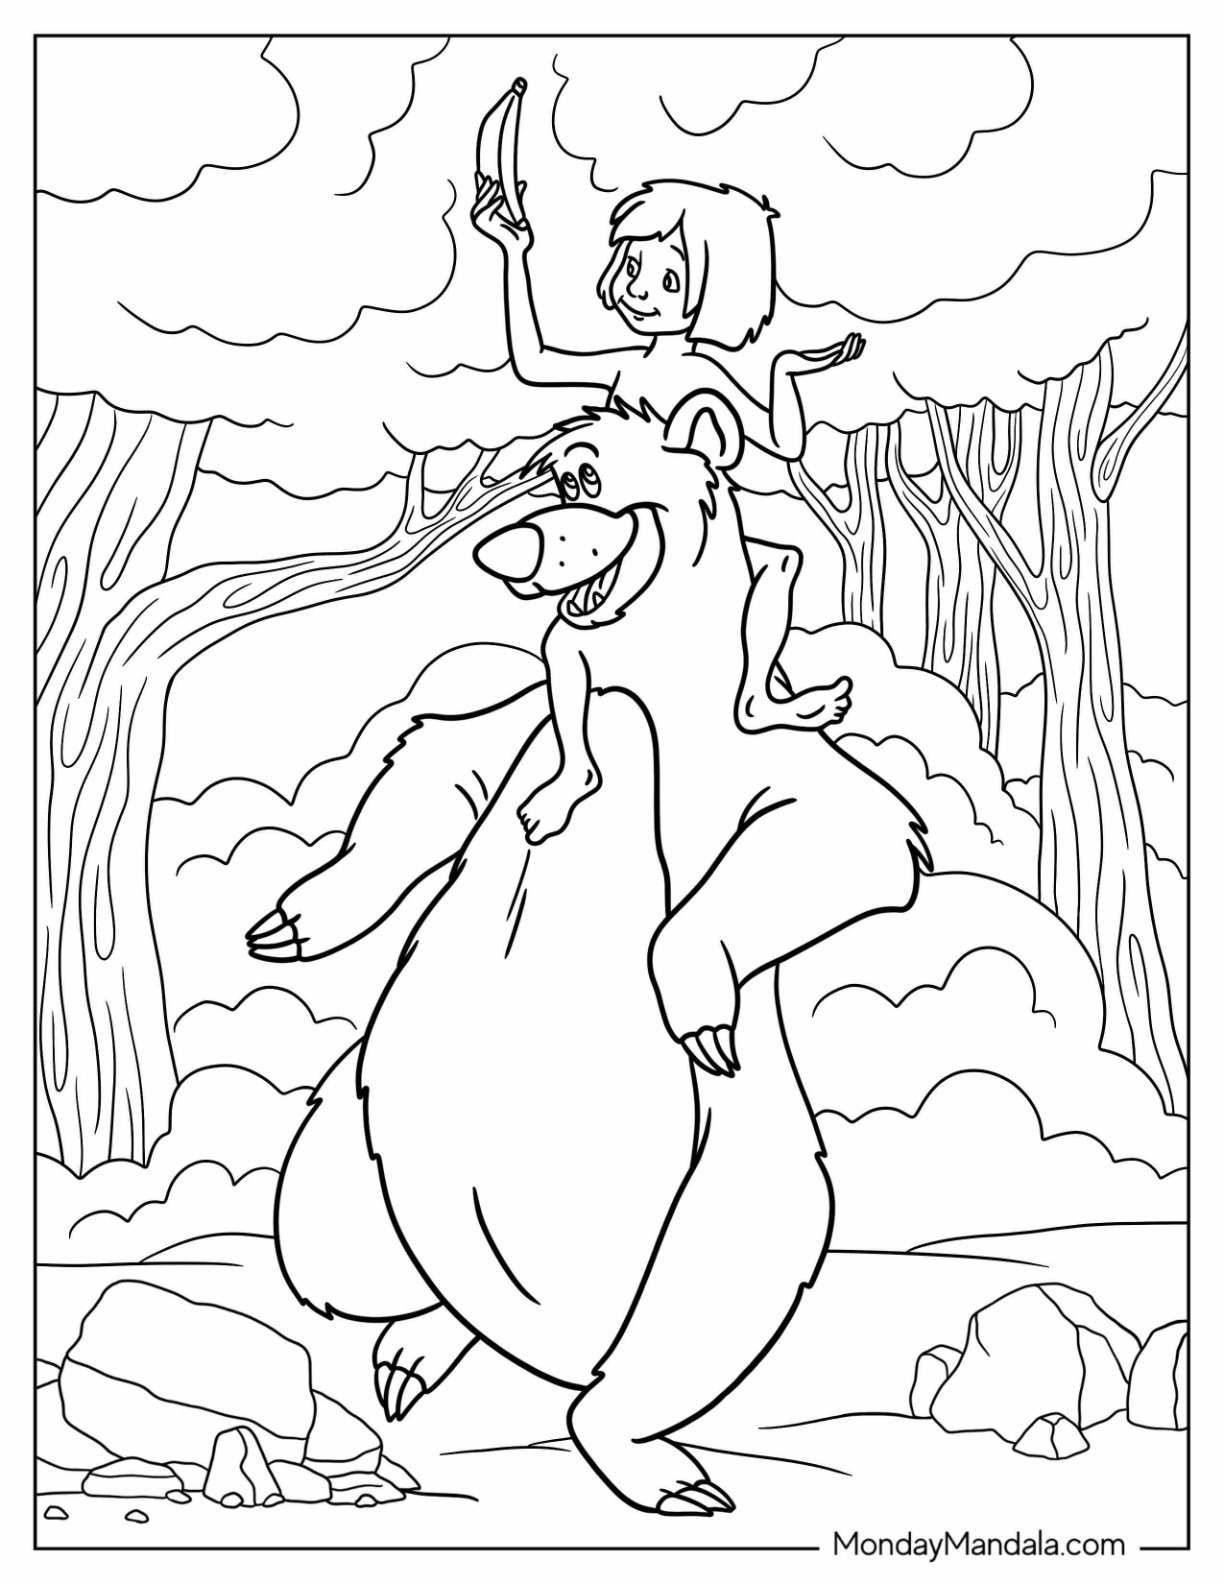 Jungle book coloring pages free pdf printable